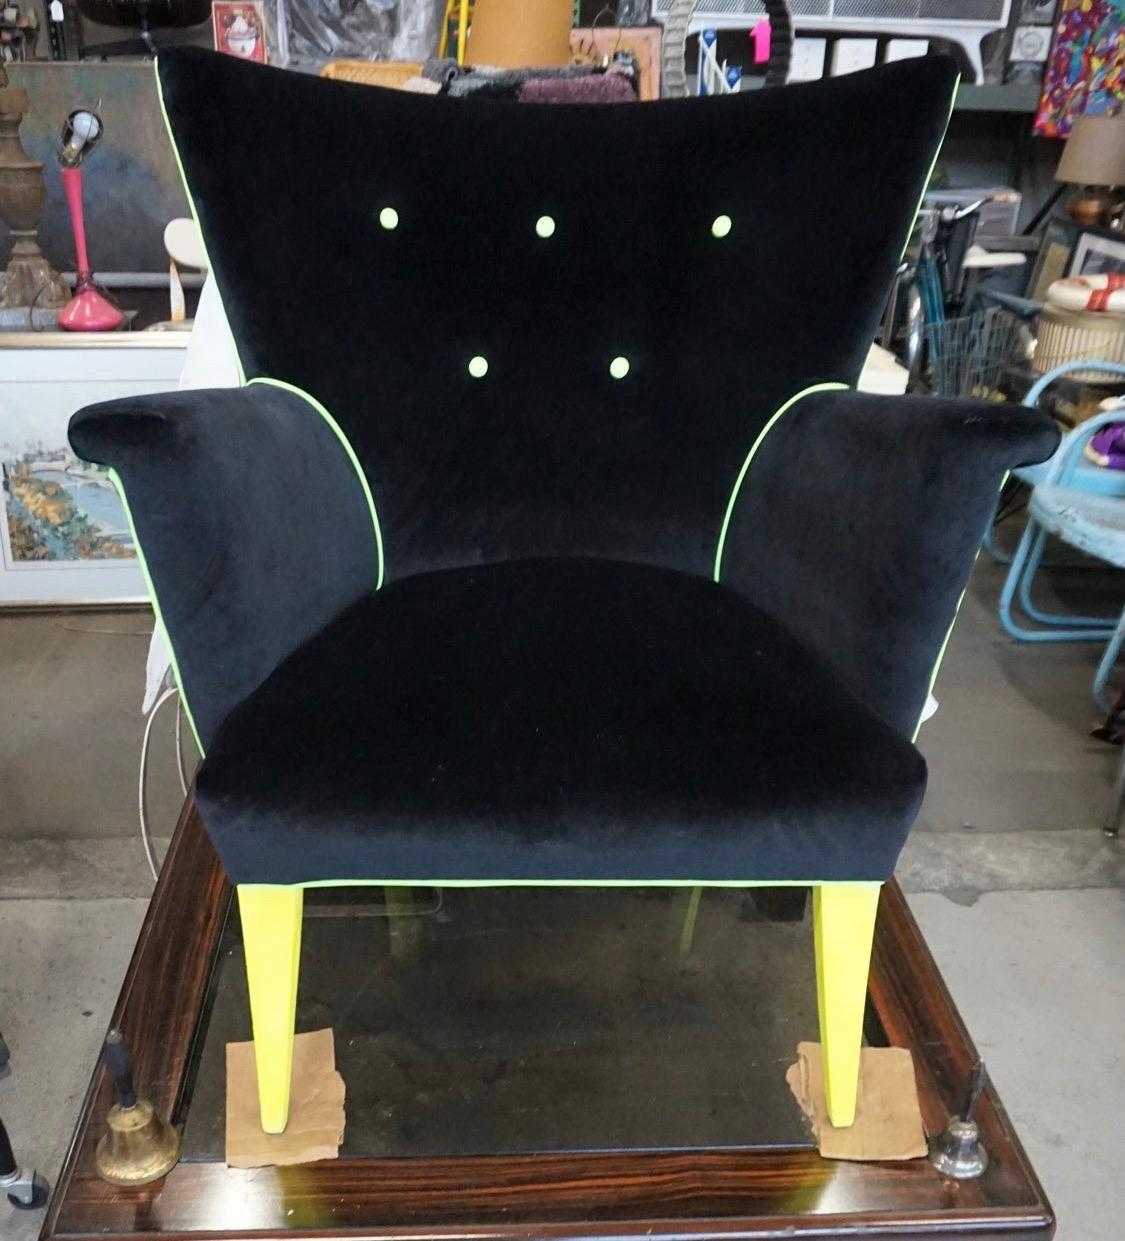 Newly reupholstered Guillermo wing chair, and iconic Hollywood Regency chair. The main fabric is black velvet and there is a burst of neon yellow piping as well. This is a very comfortable chair. Now, more than ever, home is where the heart is.